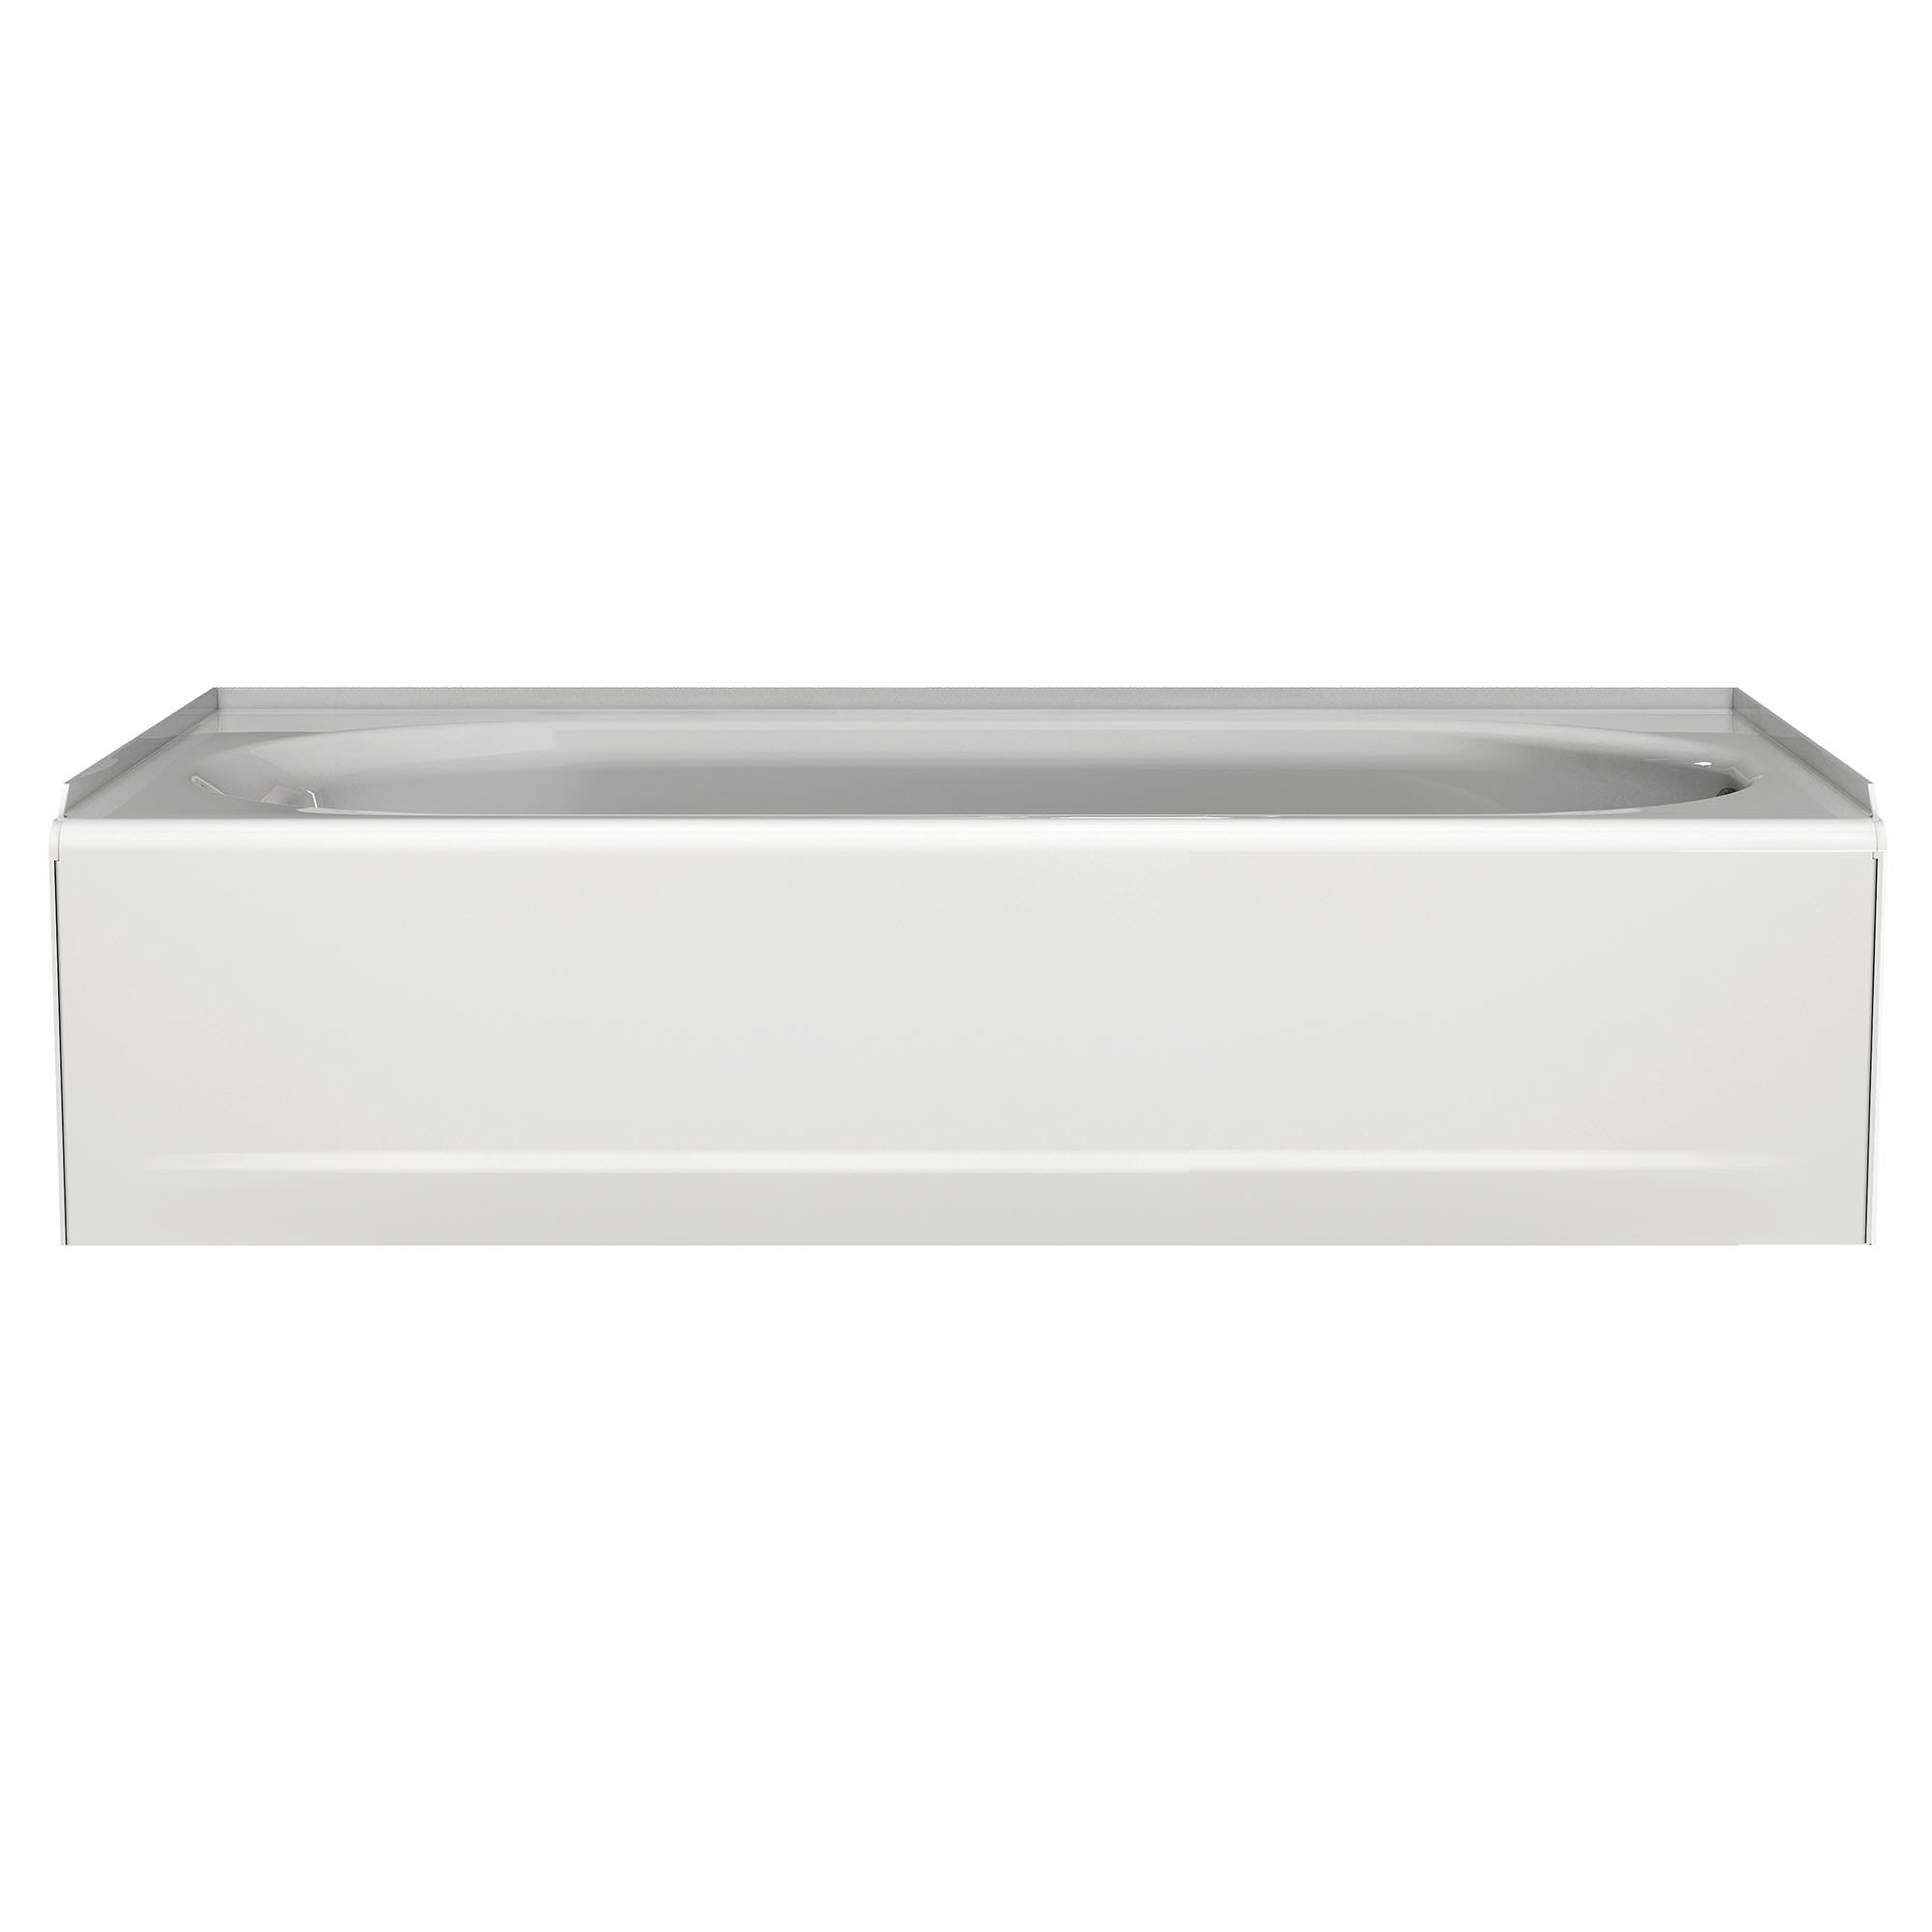 Princeton® Americast® 60 x 34-Inch Integral Apron Bathtub Above Floor Rough Right-Hand Outlet Luxury Ledge with Integral Drain